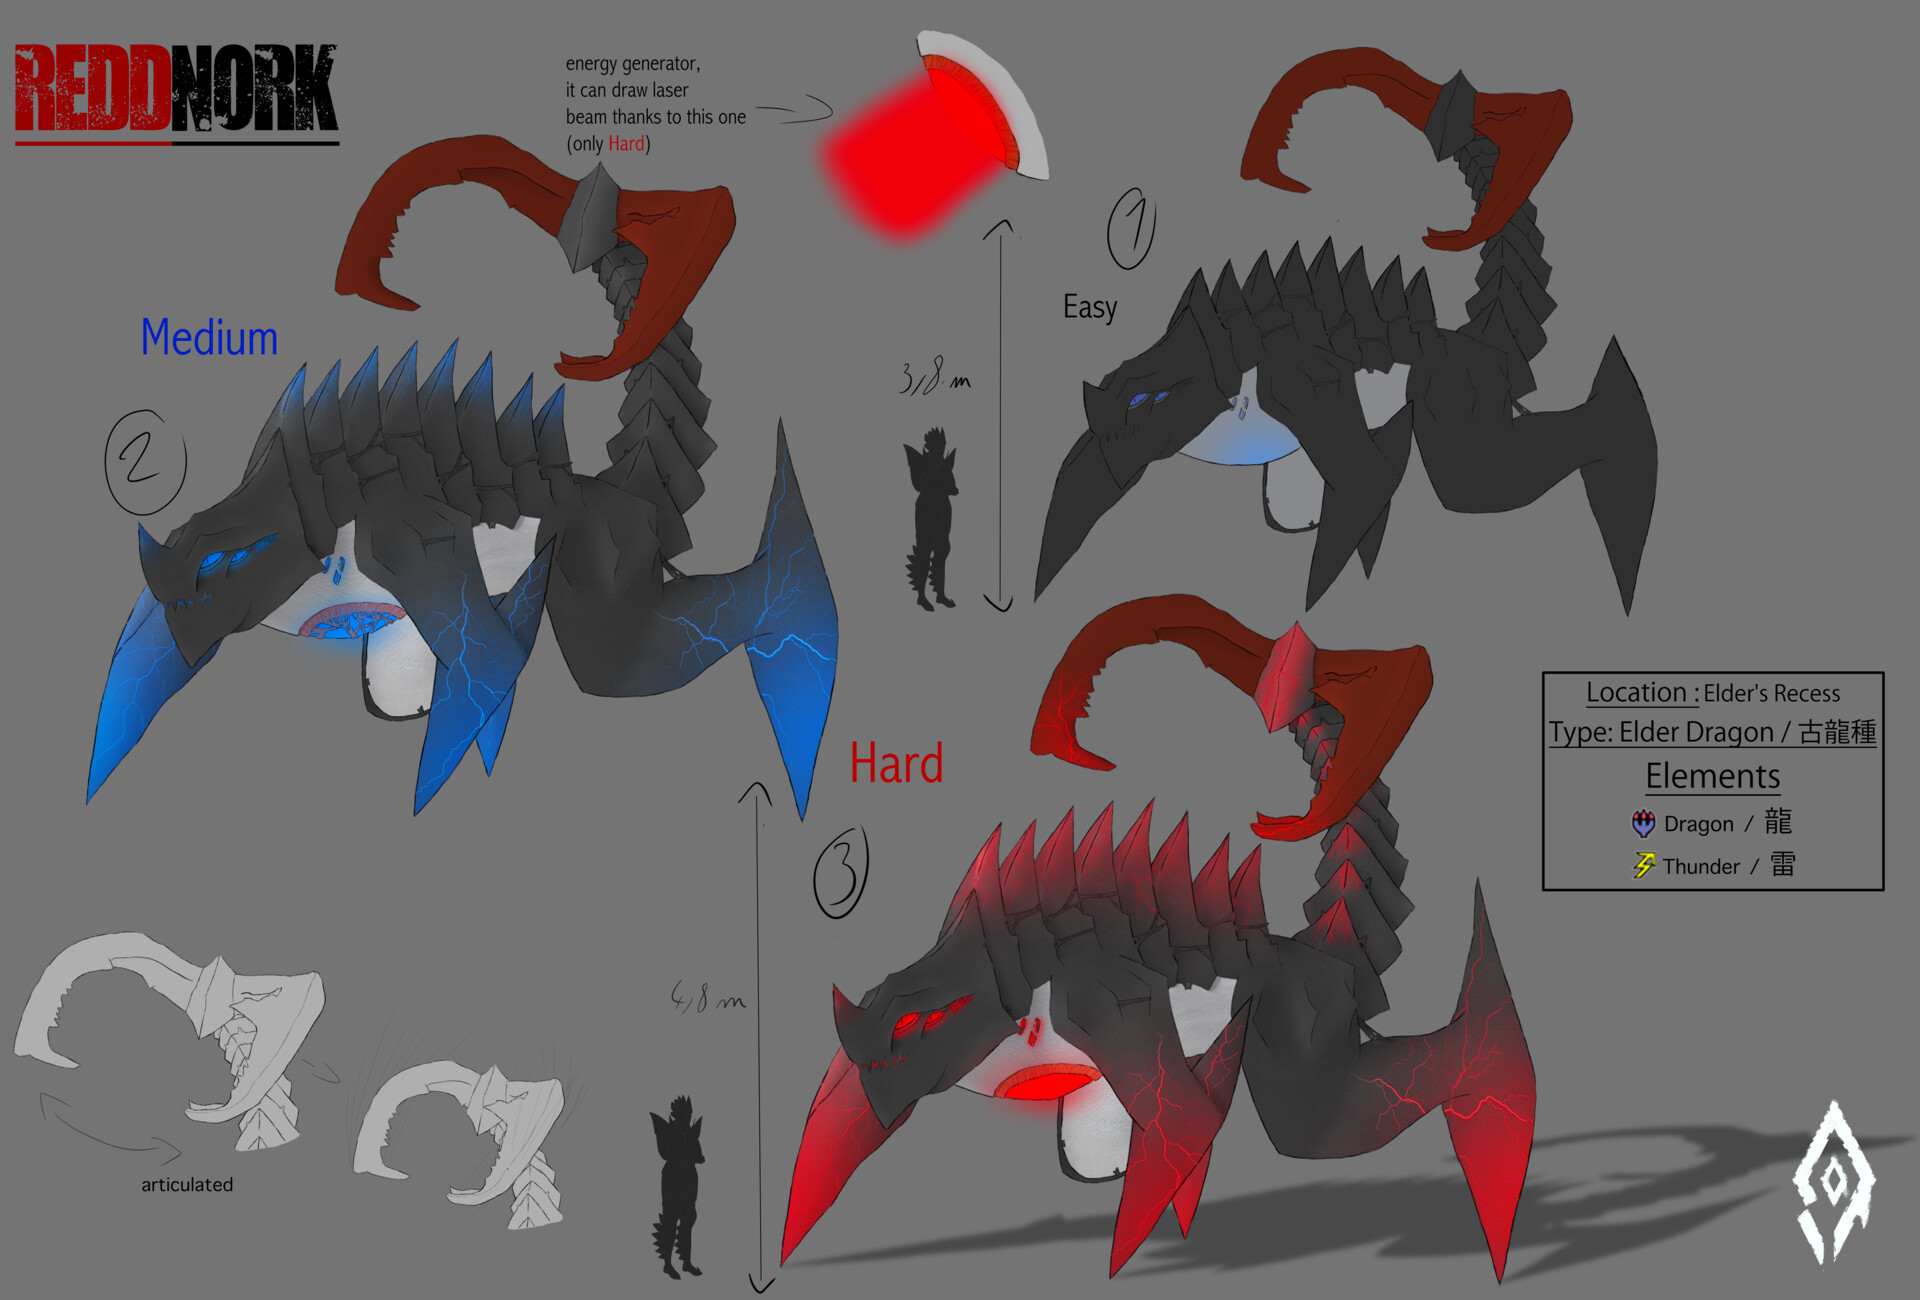 ArtStation - Creature Concept Sheets for Creatures of Sonaria by Twin  Atlas LLC